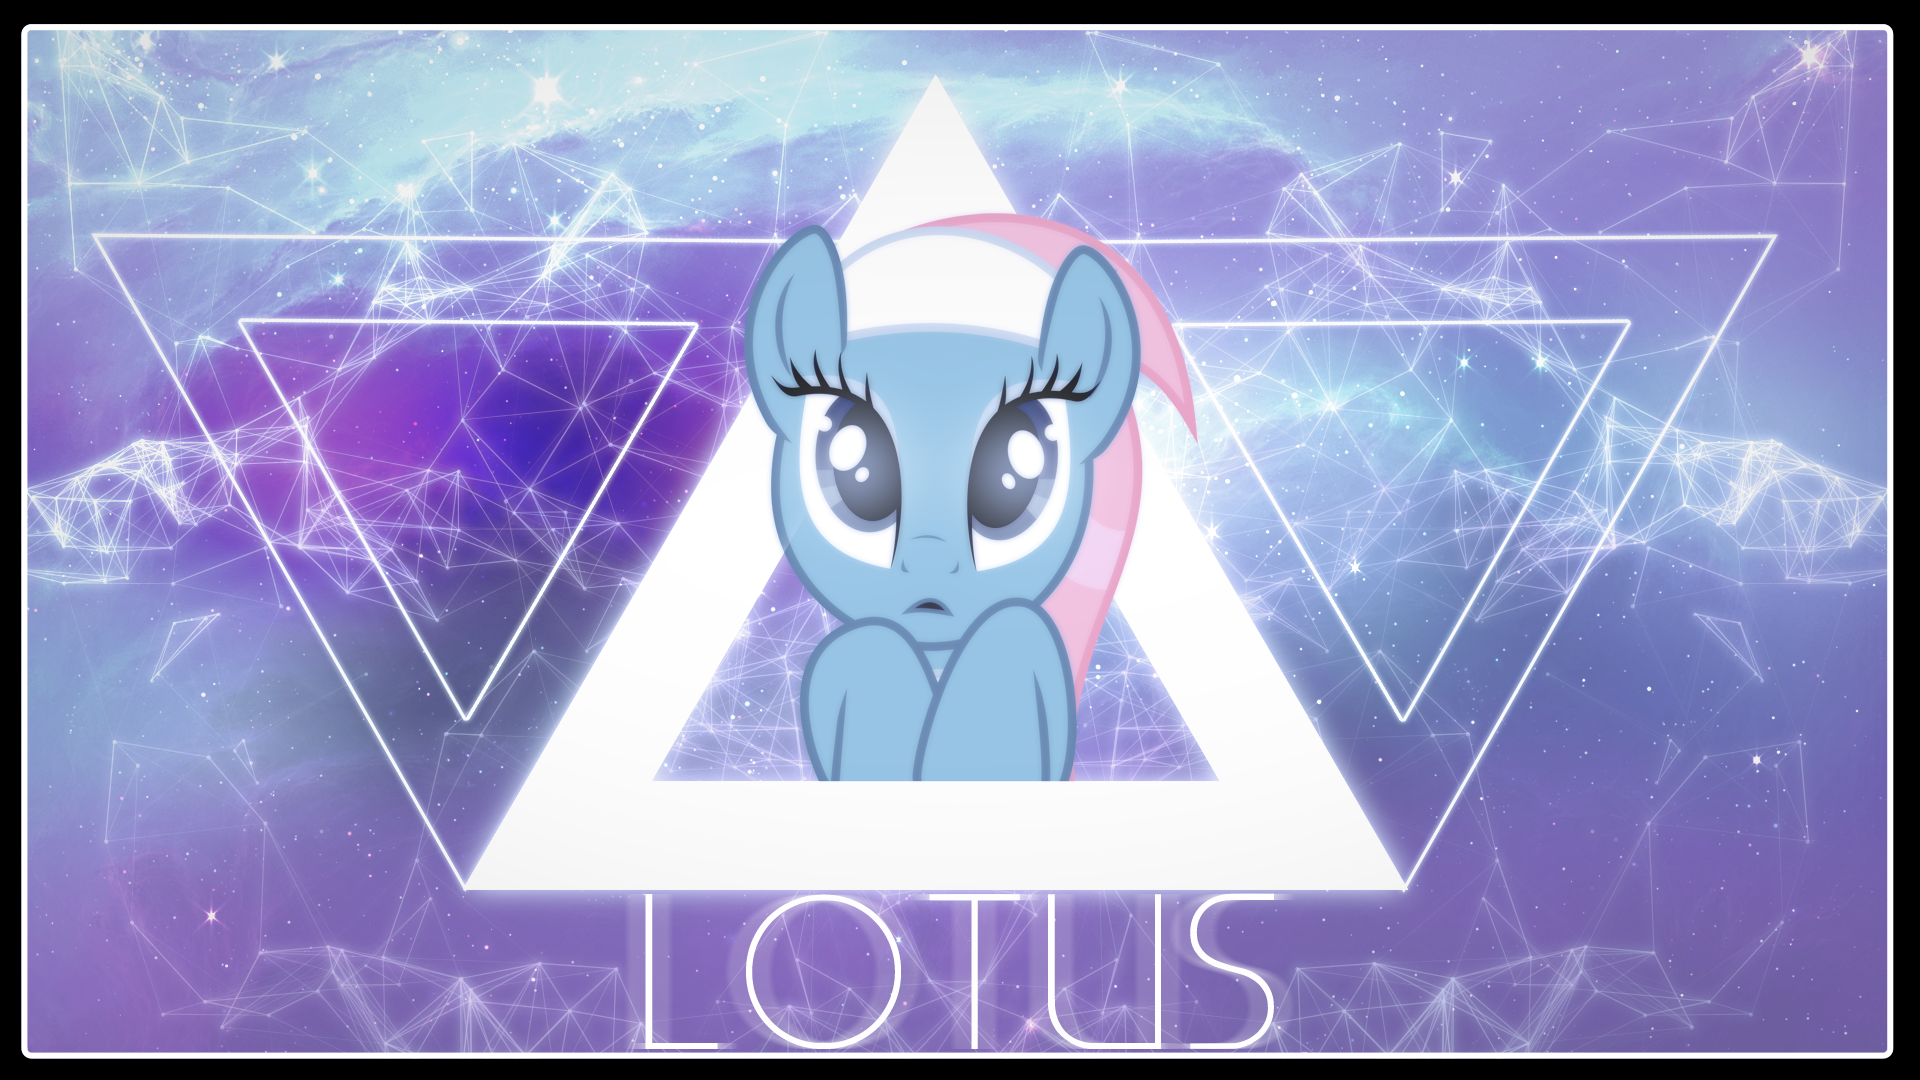 Lotus by BucketOfWhales and Overmare